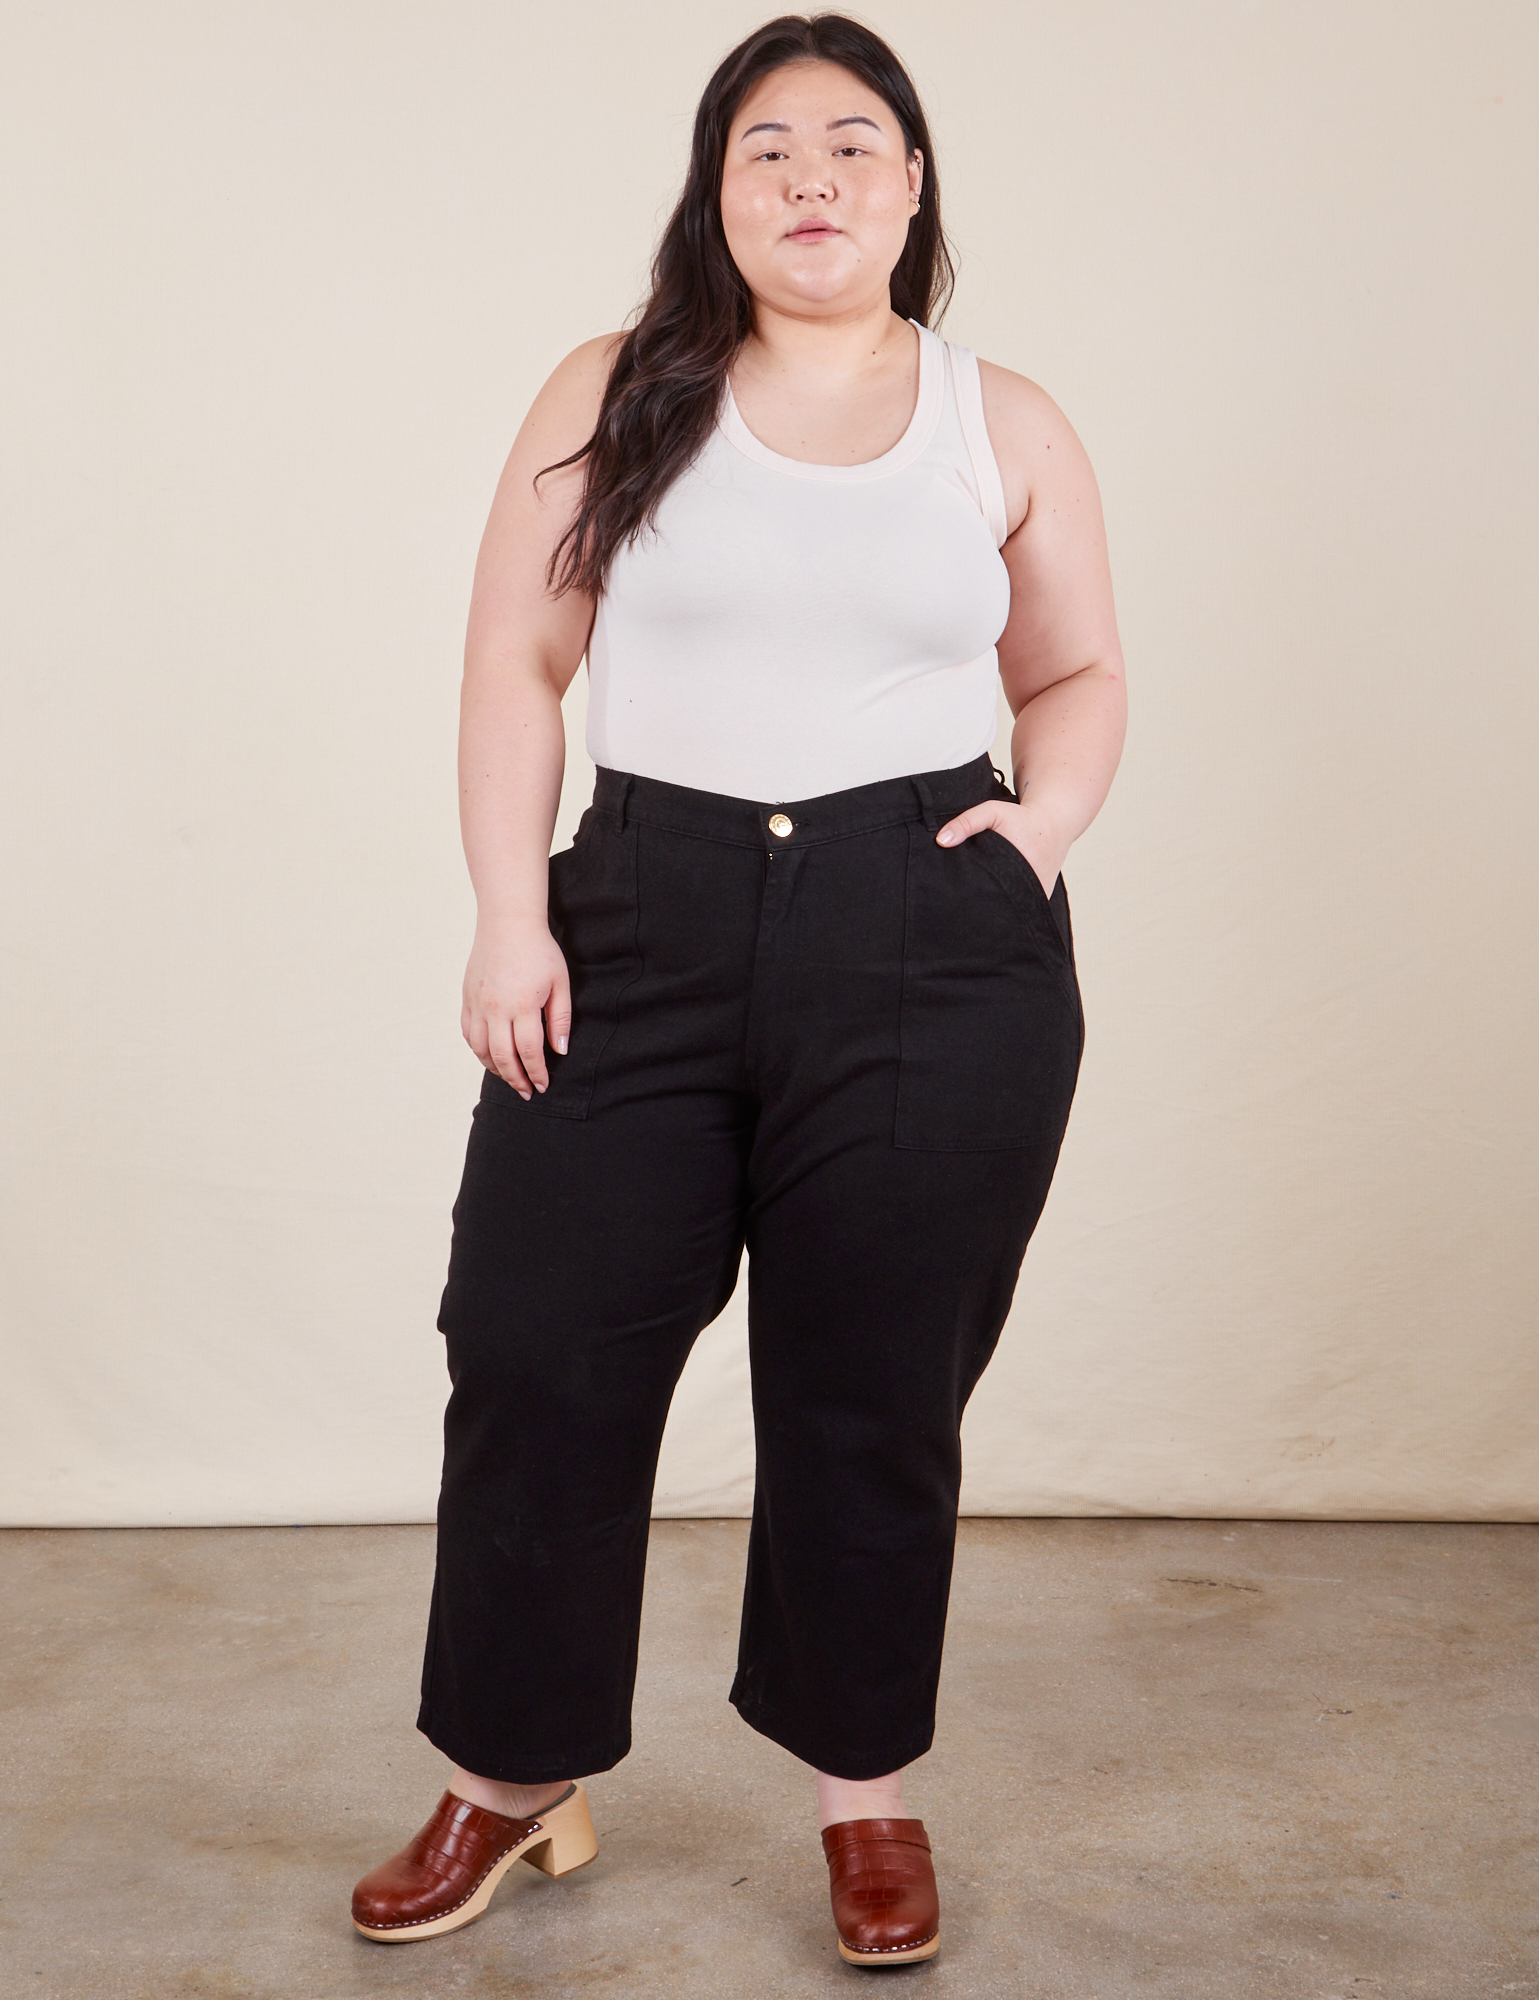 Ashley is 5&#39;7&quot; and wearing Petite 1XL Work Pants in Basic Black paired with Tank Top in vintage tee off-white